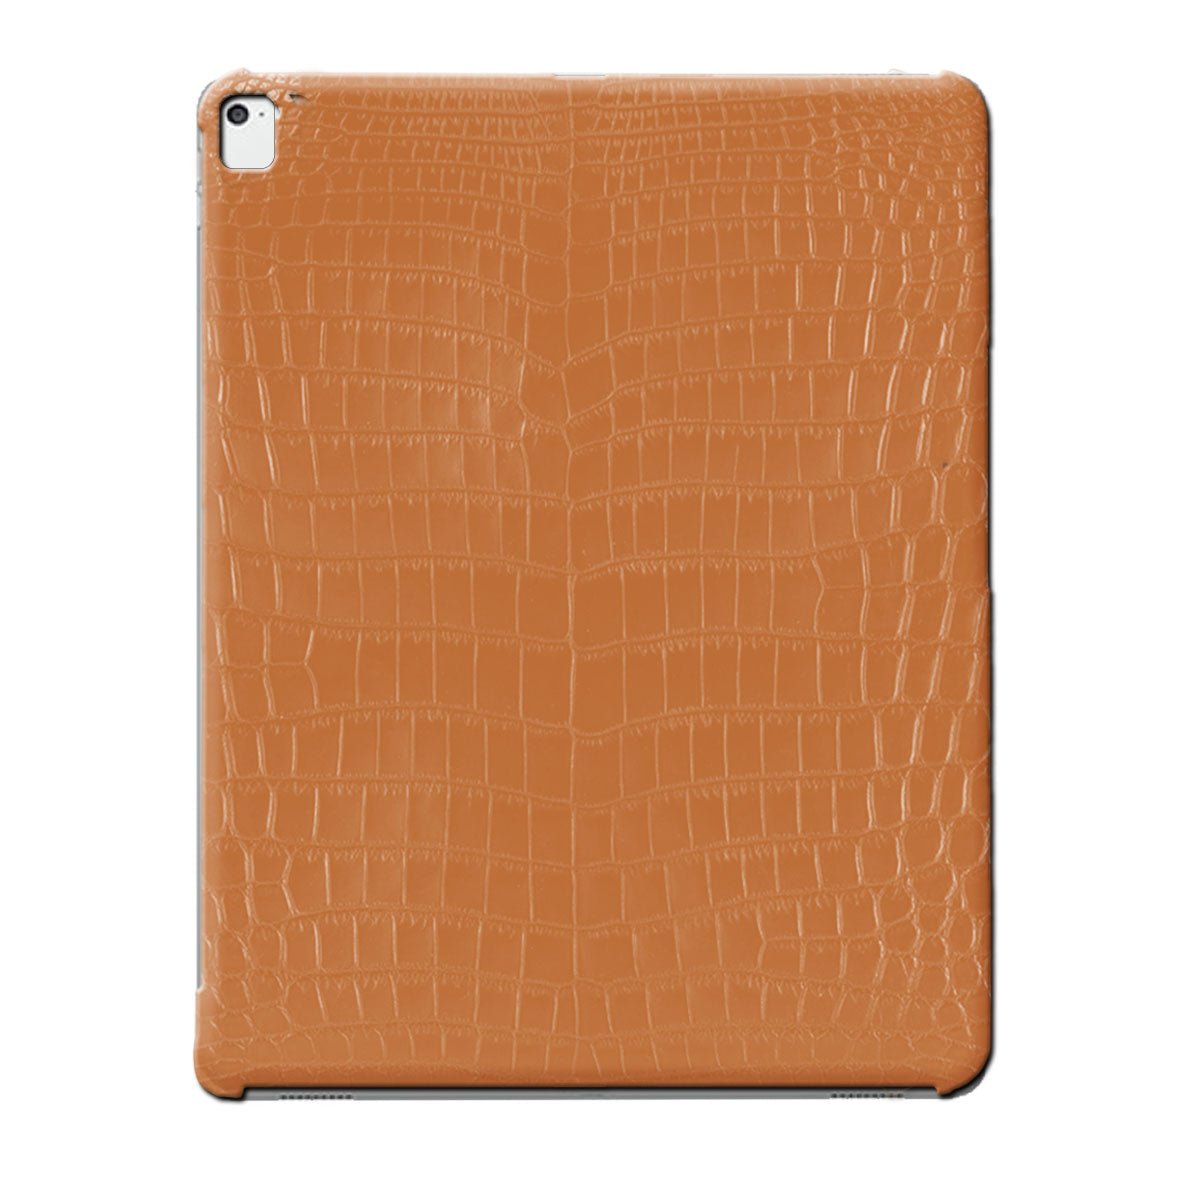 Leather iPad case / cover - iPad Pro 12.9 inches ( 1st to 5th generation )  - Genuine alligator – ABP Concept